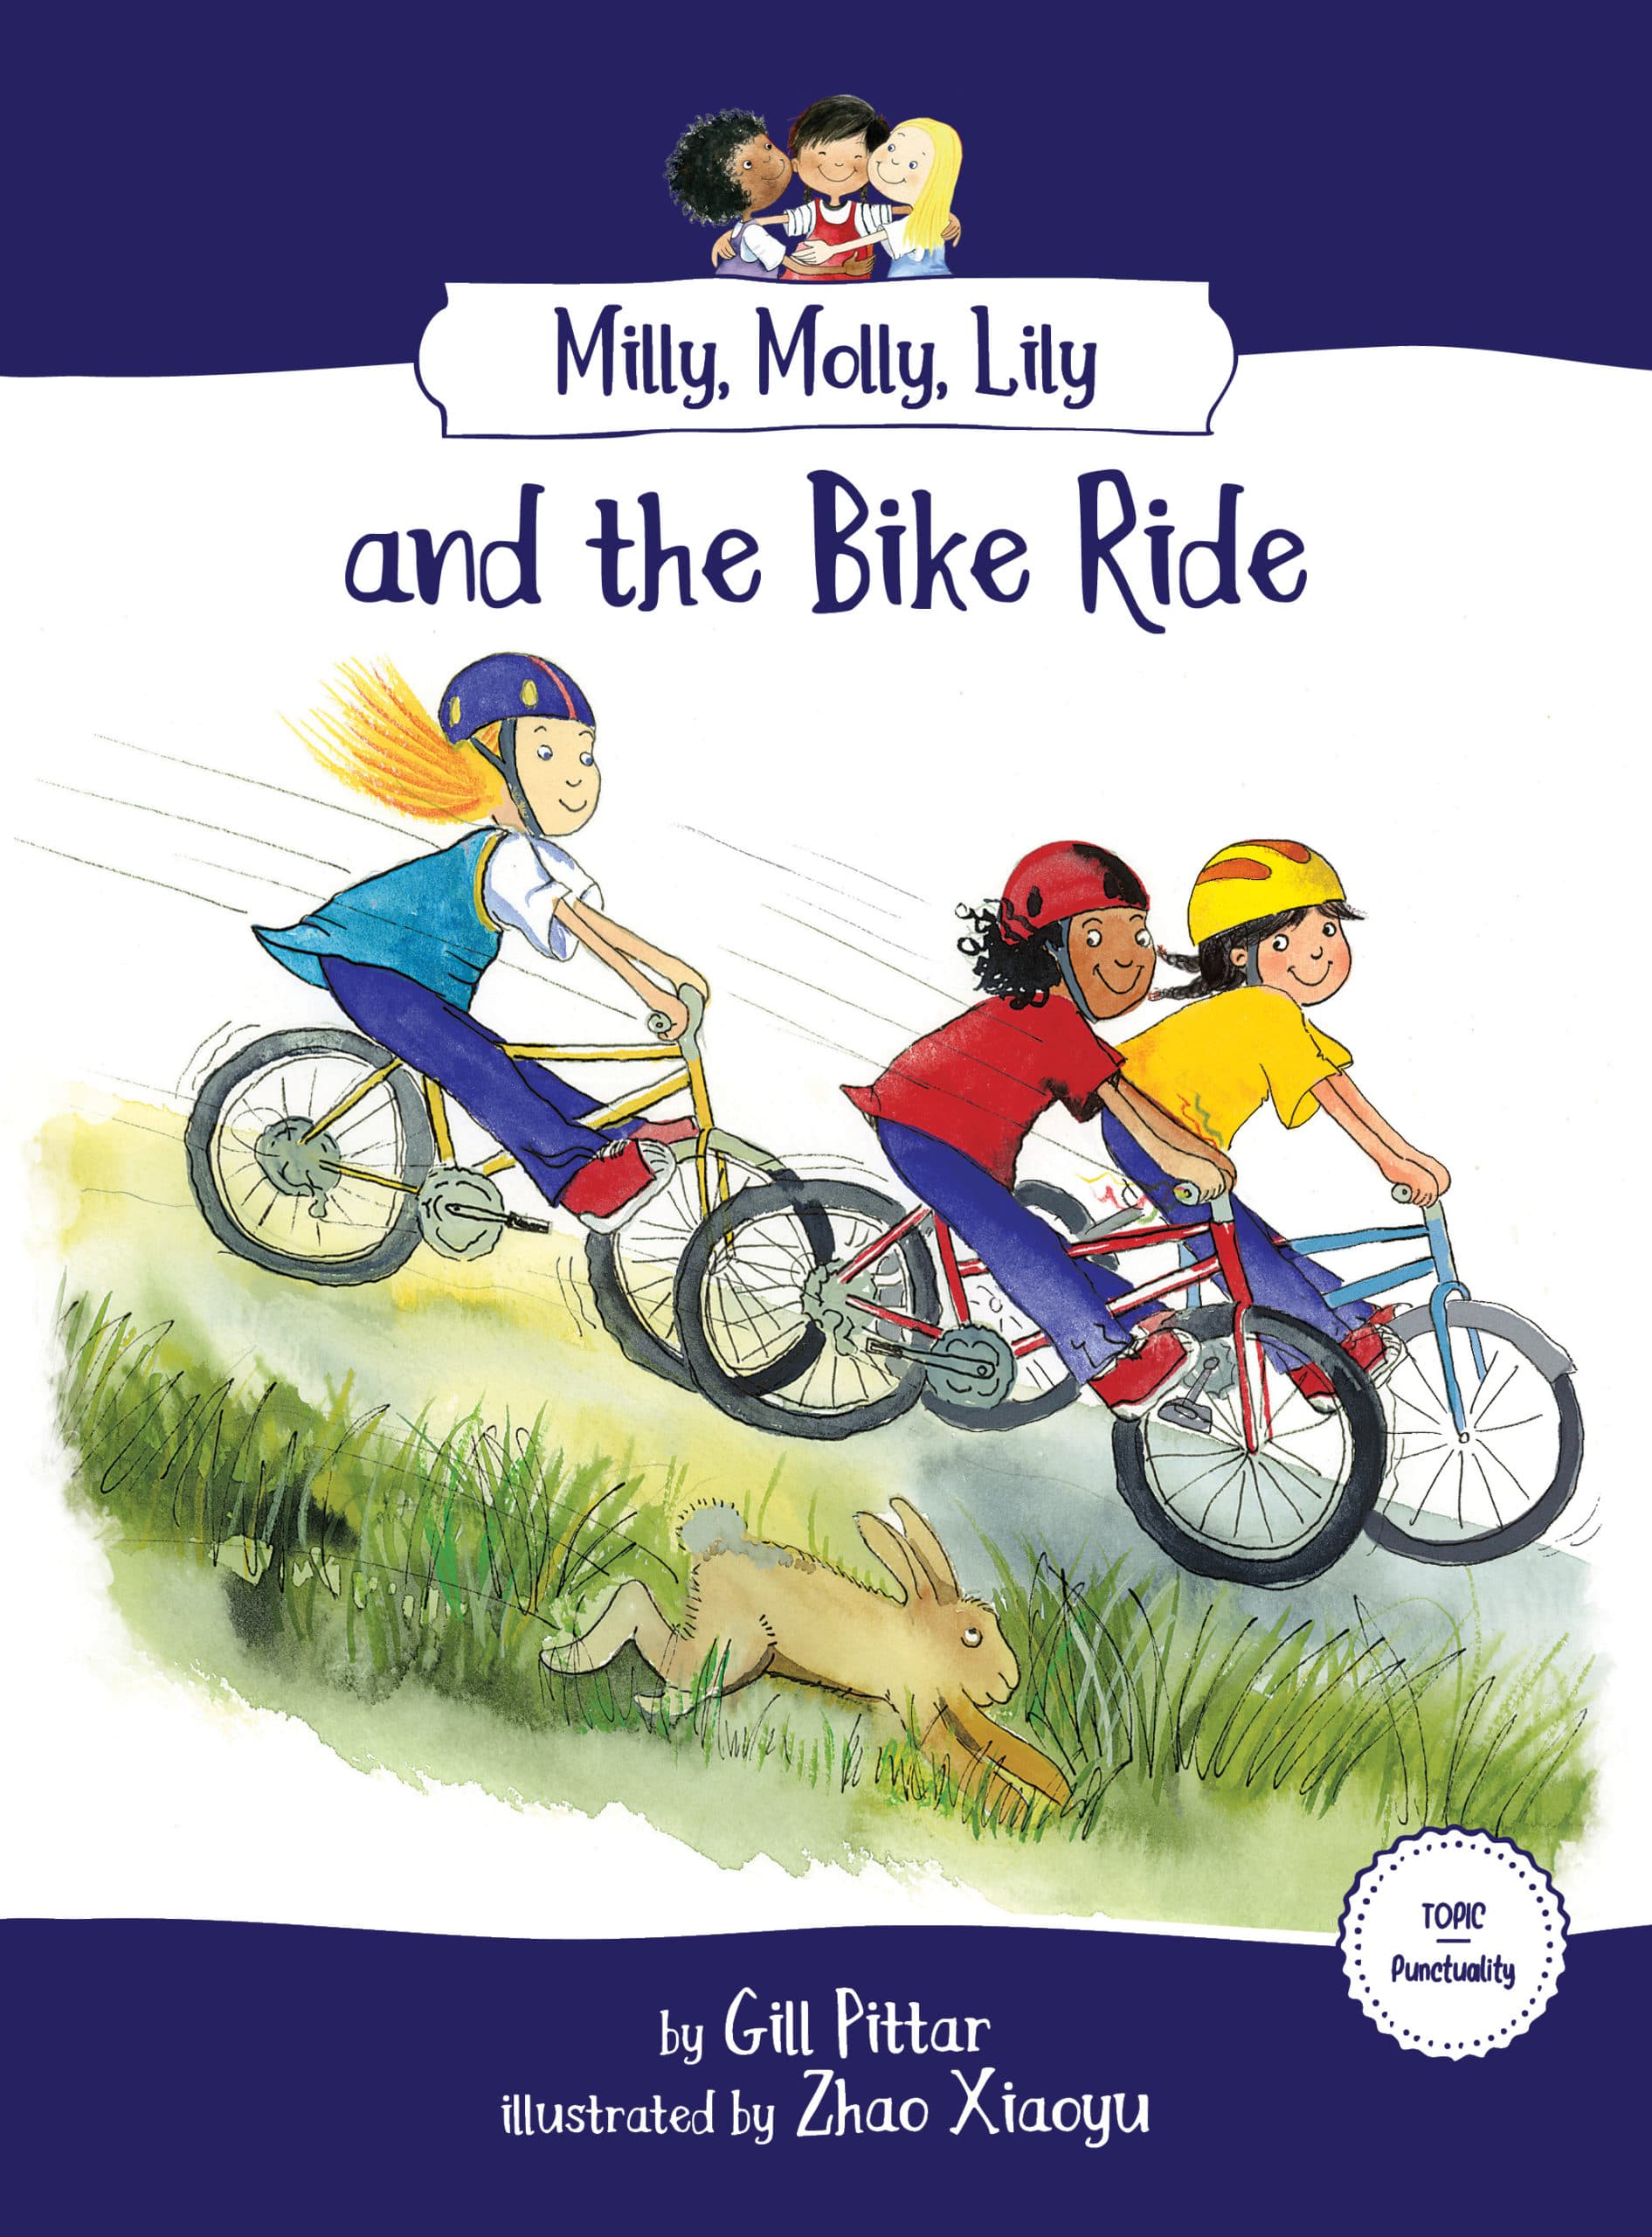 Milly, Molly, Lily and the Bike Ride book cover